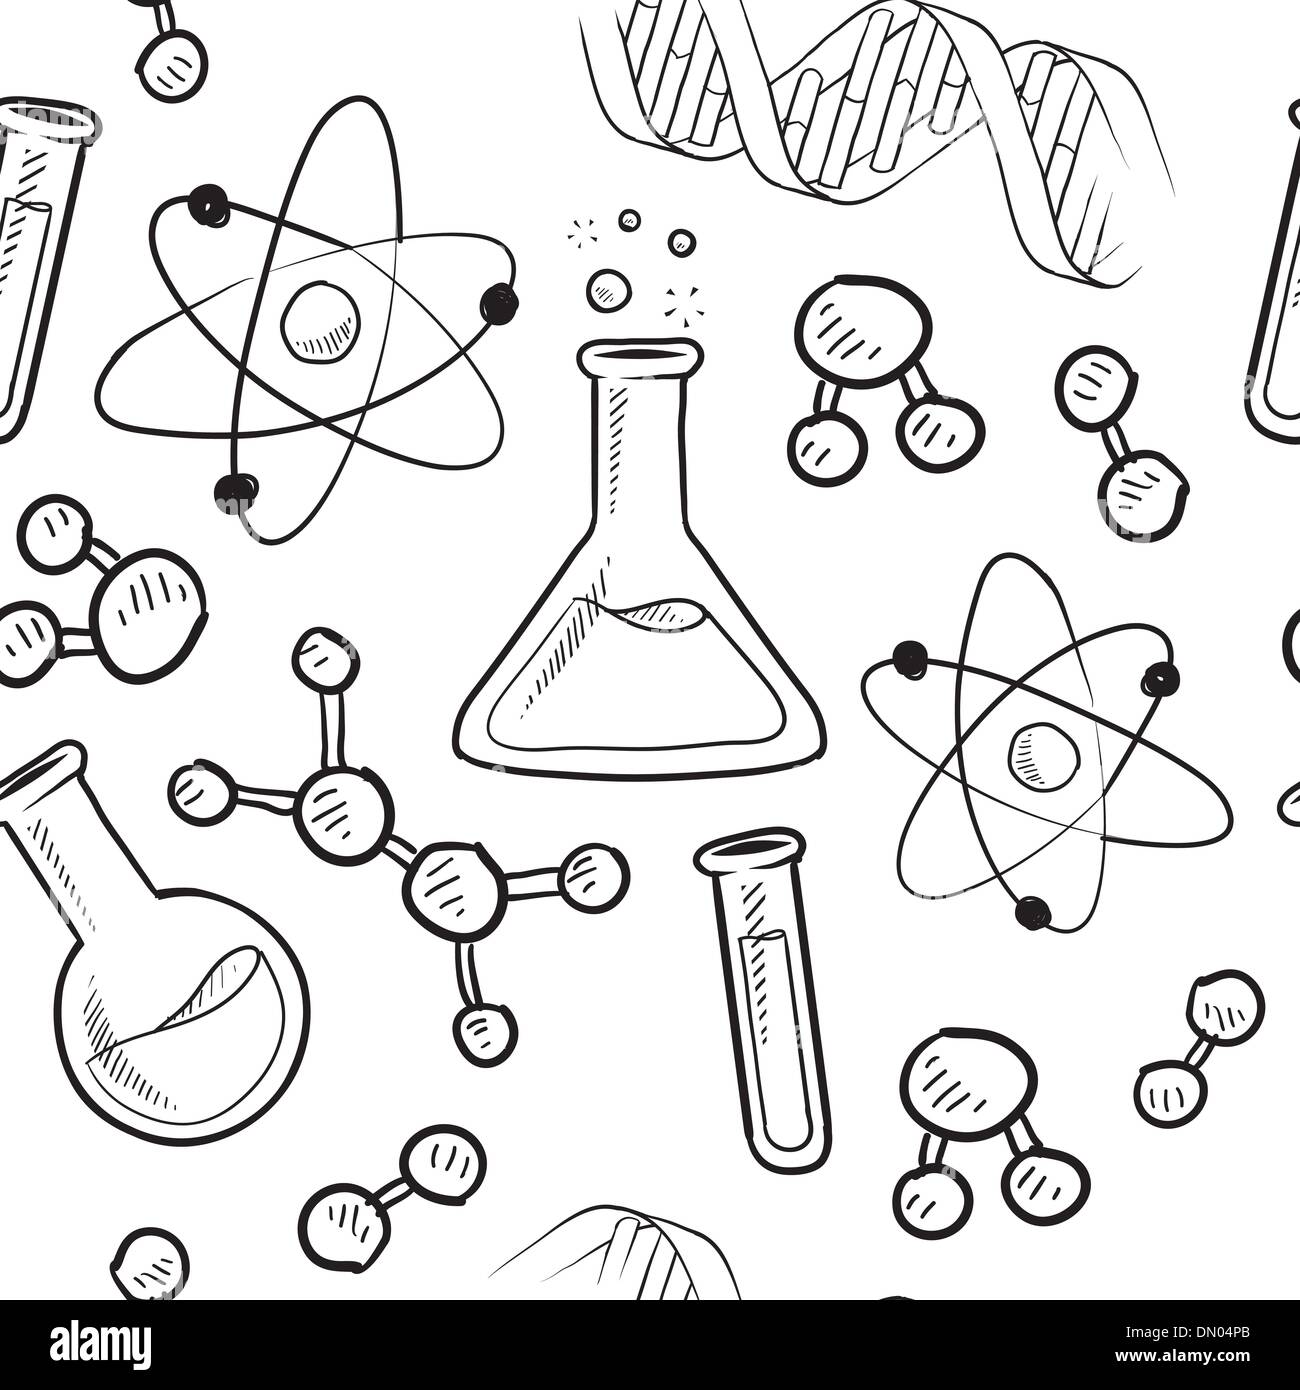 Science lab background Black and White Stock Photos & Images - Alamy